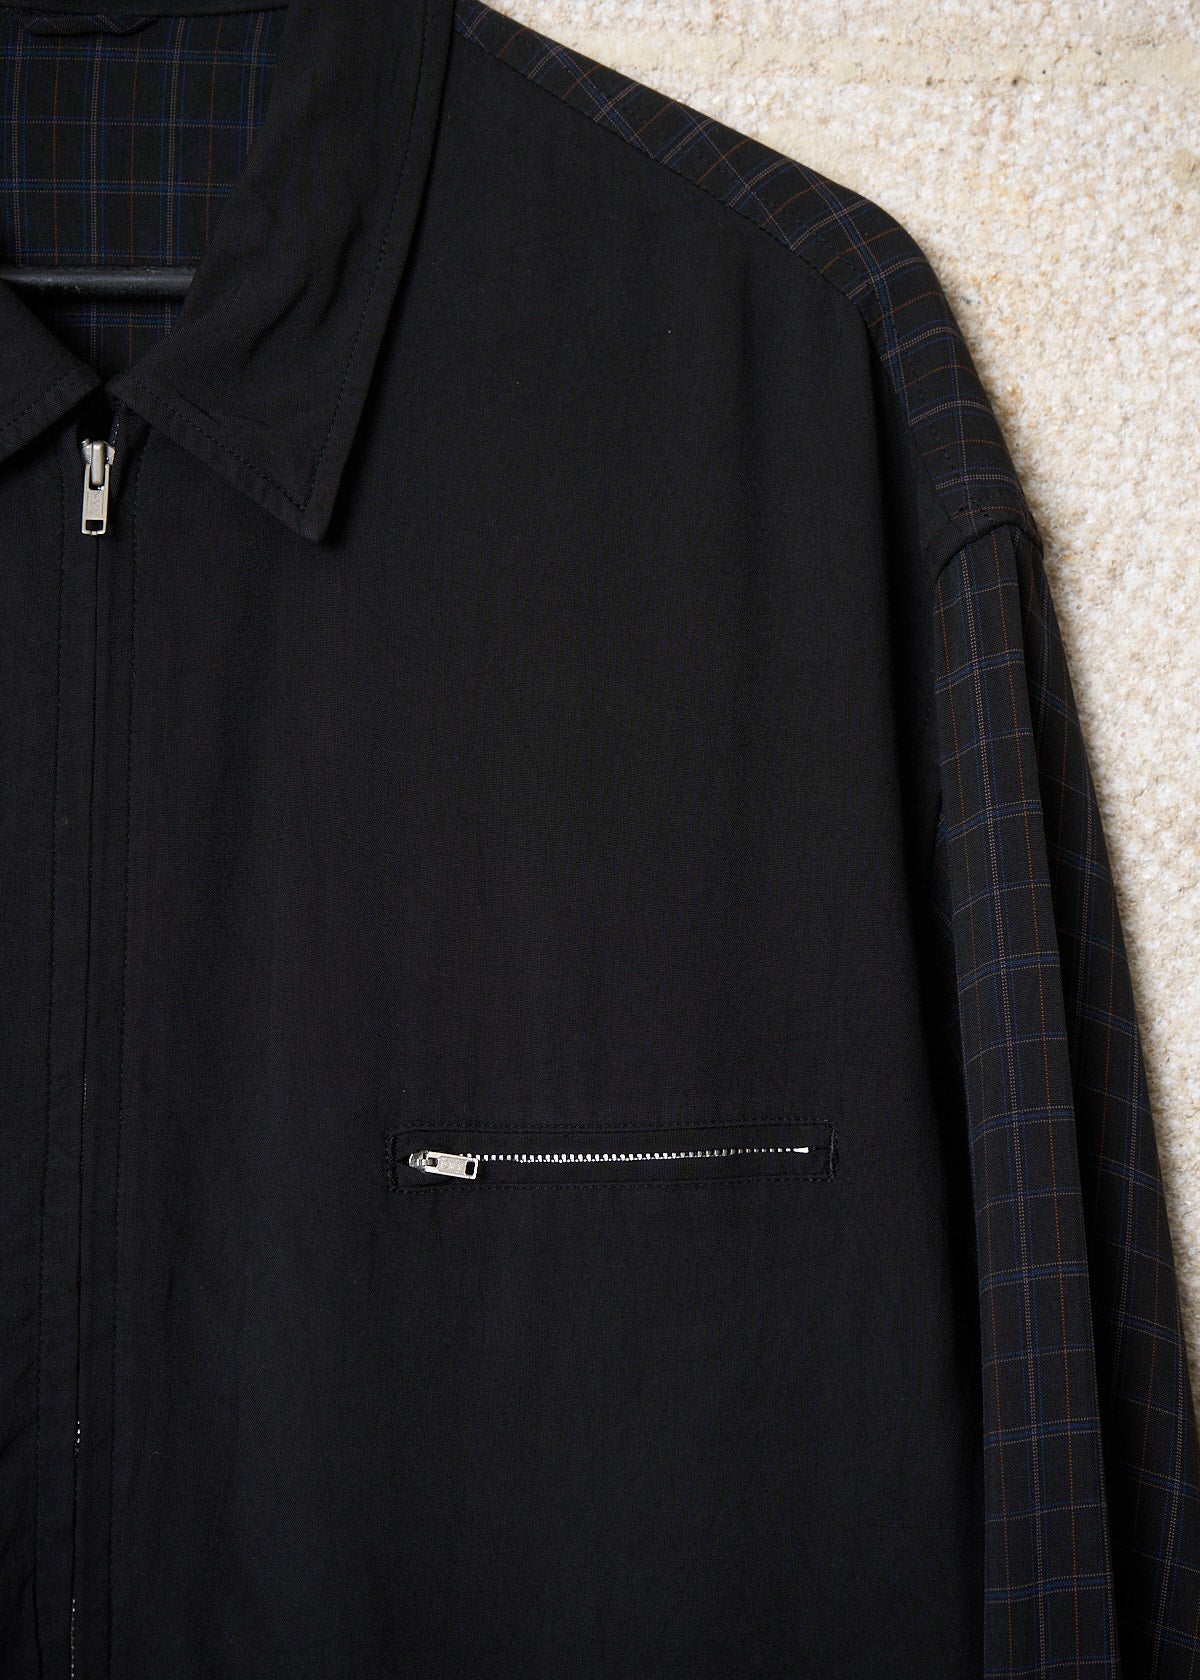 CDG Homme Black Checkered Sleeves And Back Rayon Work Jacket 1980's - Medium